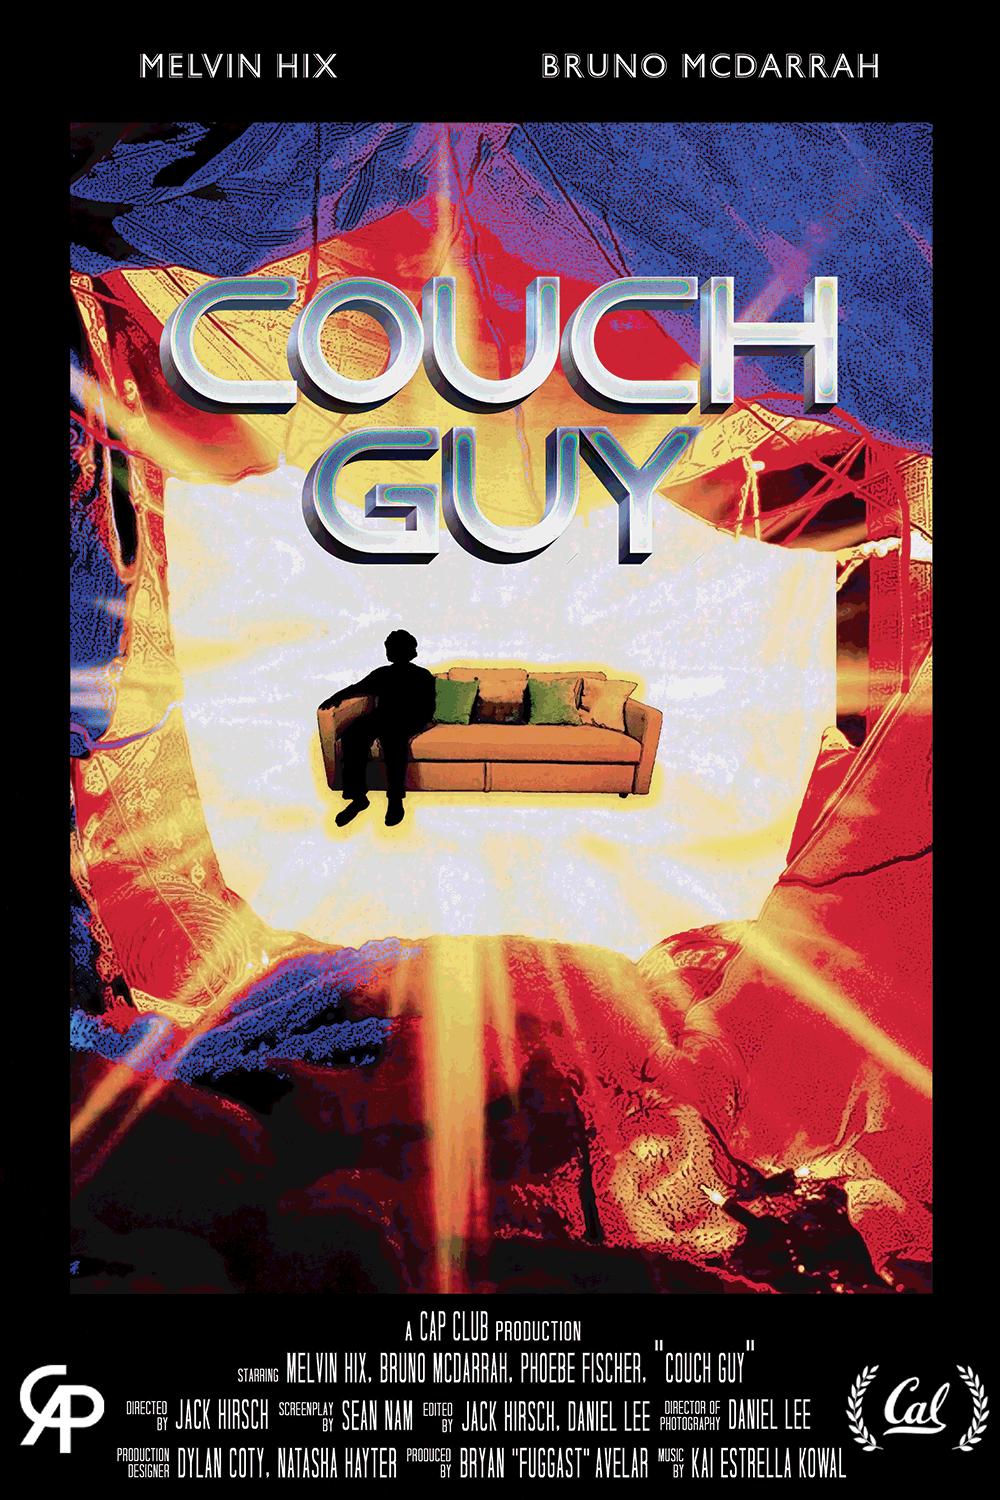 Couch Guy